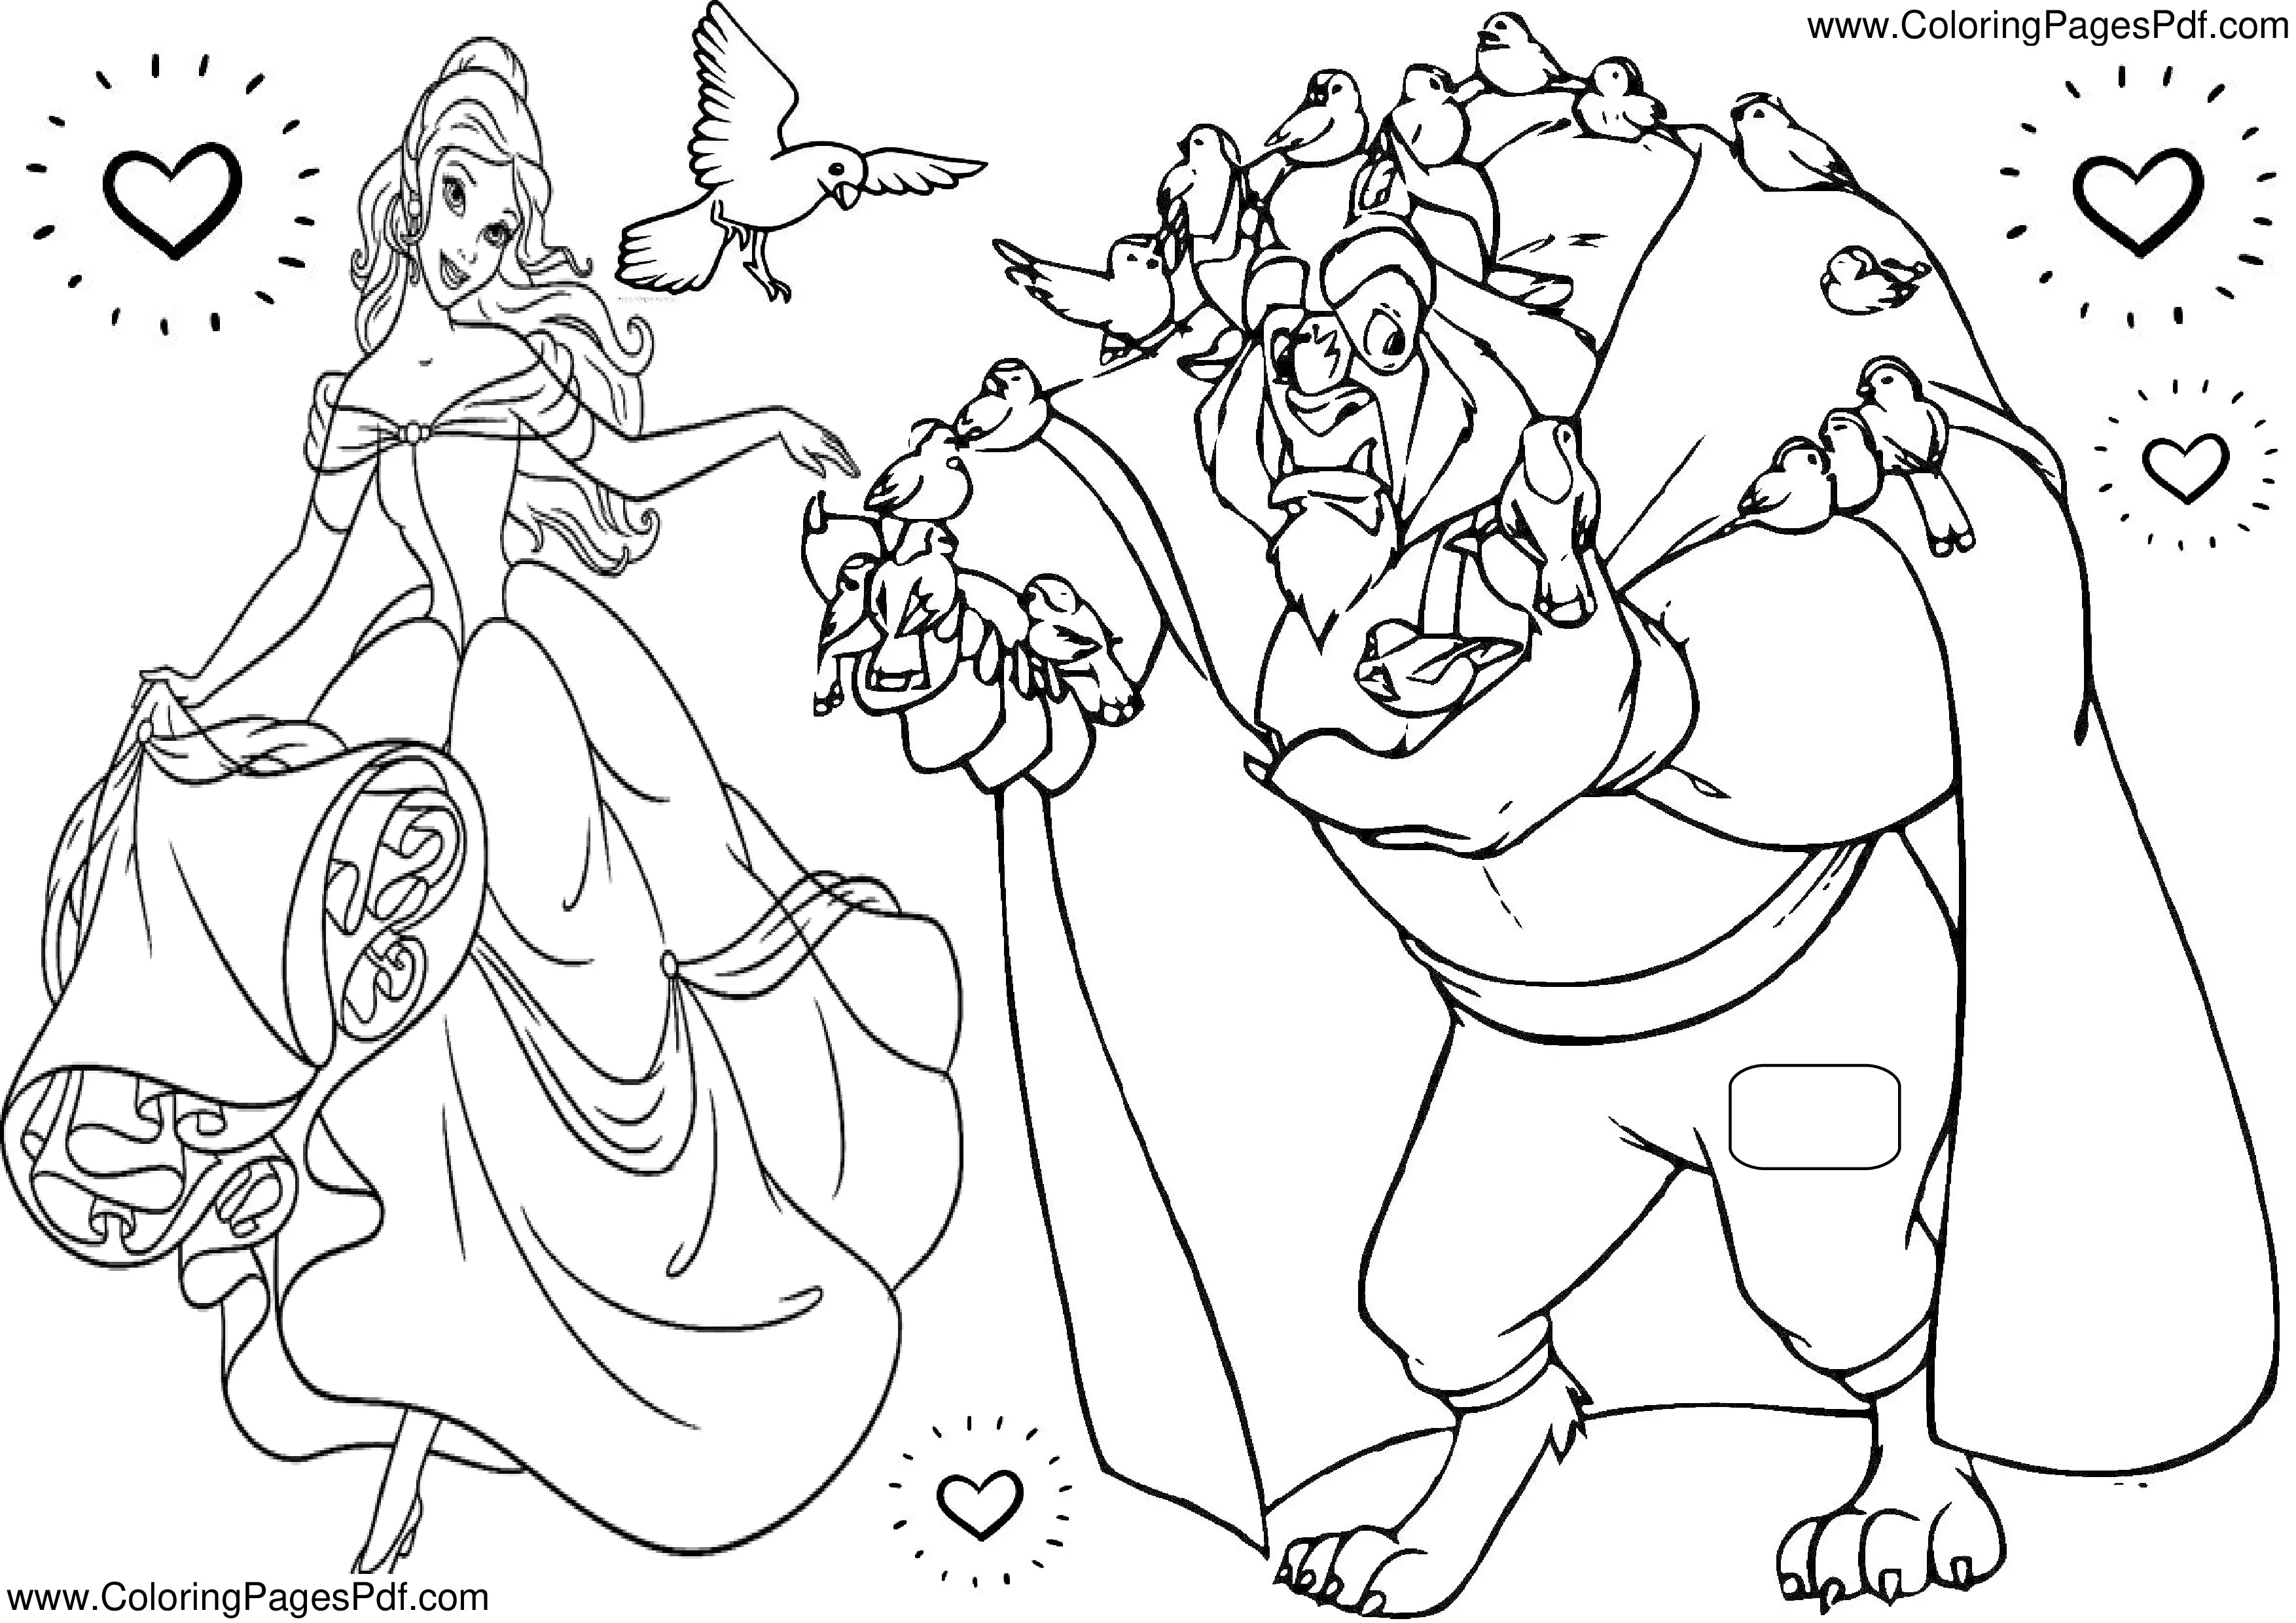 Beauty and the beast coloring pages for adults